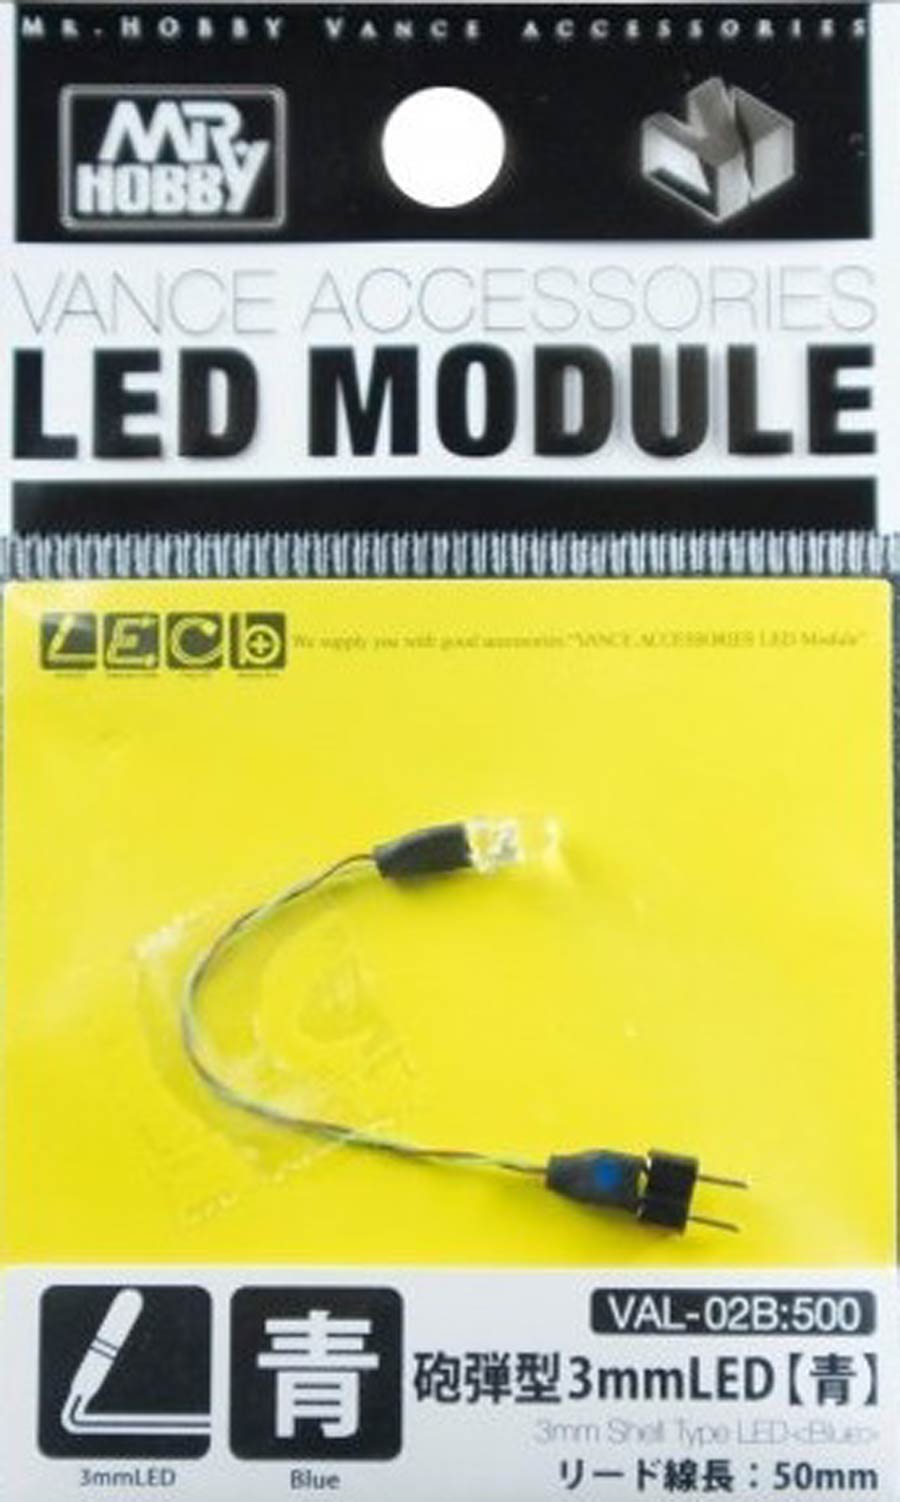 Mr. Hobby Vance Accessories LED Module -  Bag Of 10 Units - 3mm Shell Type LED (Blue)